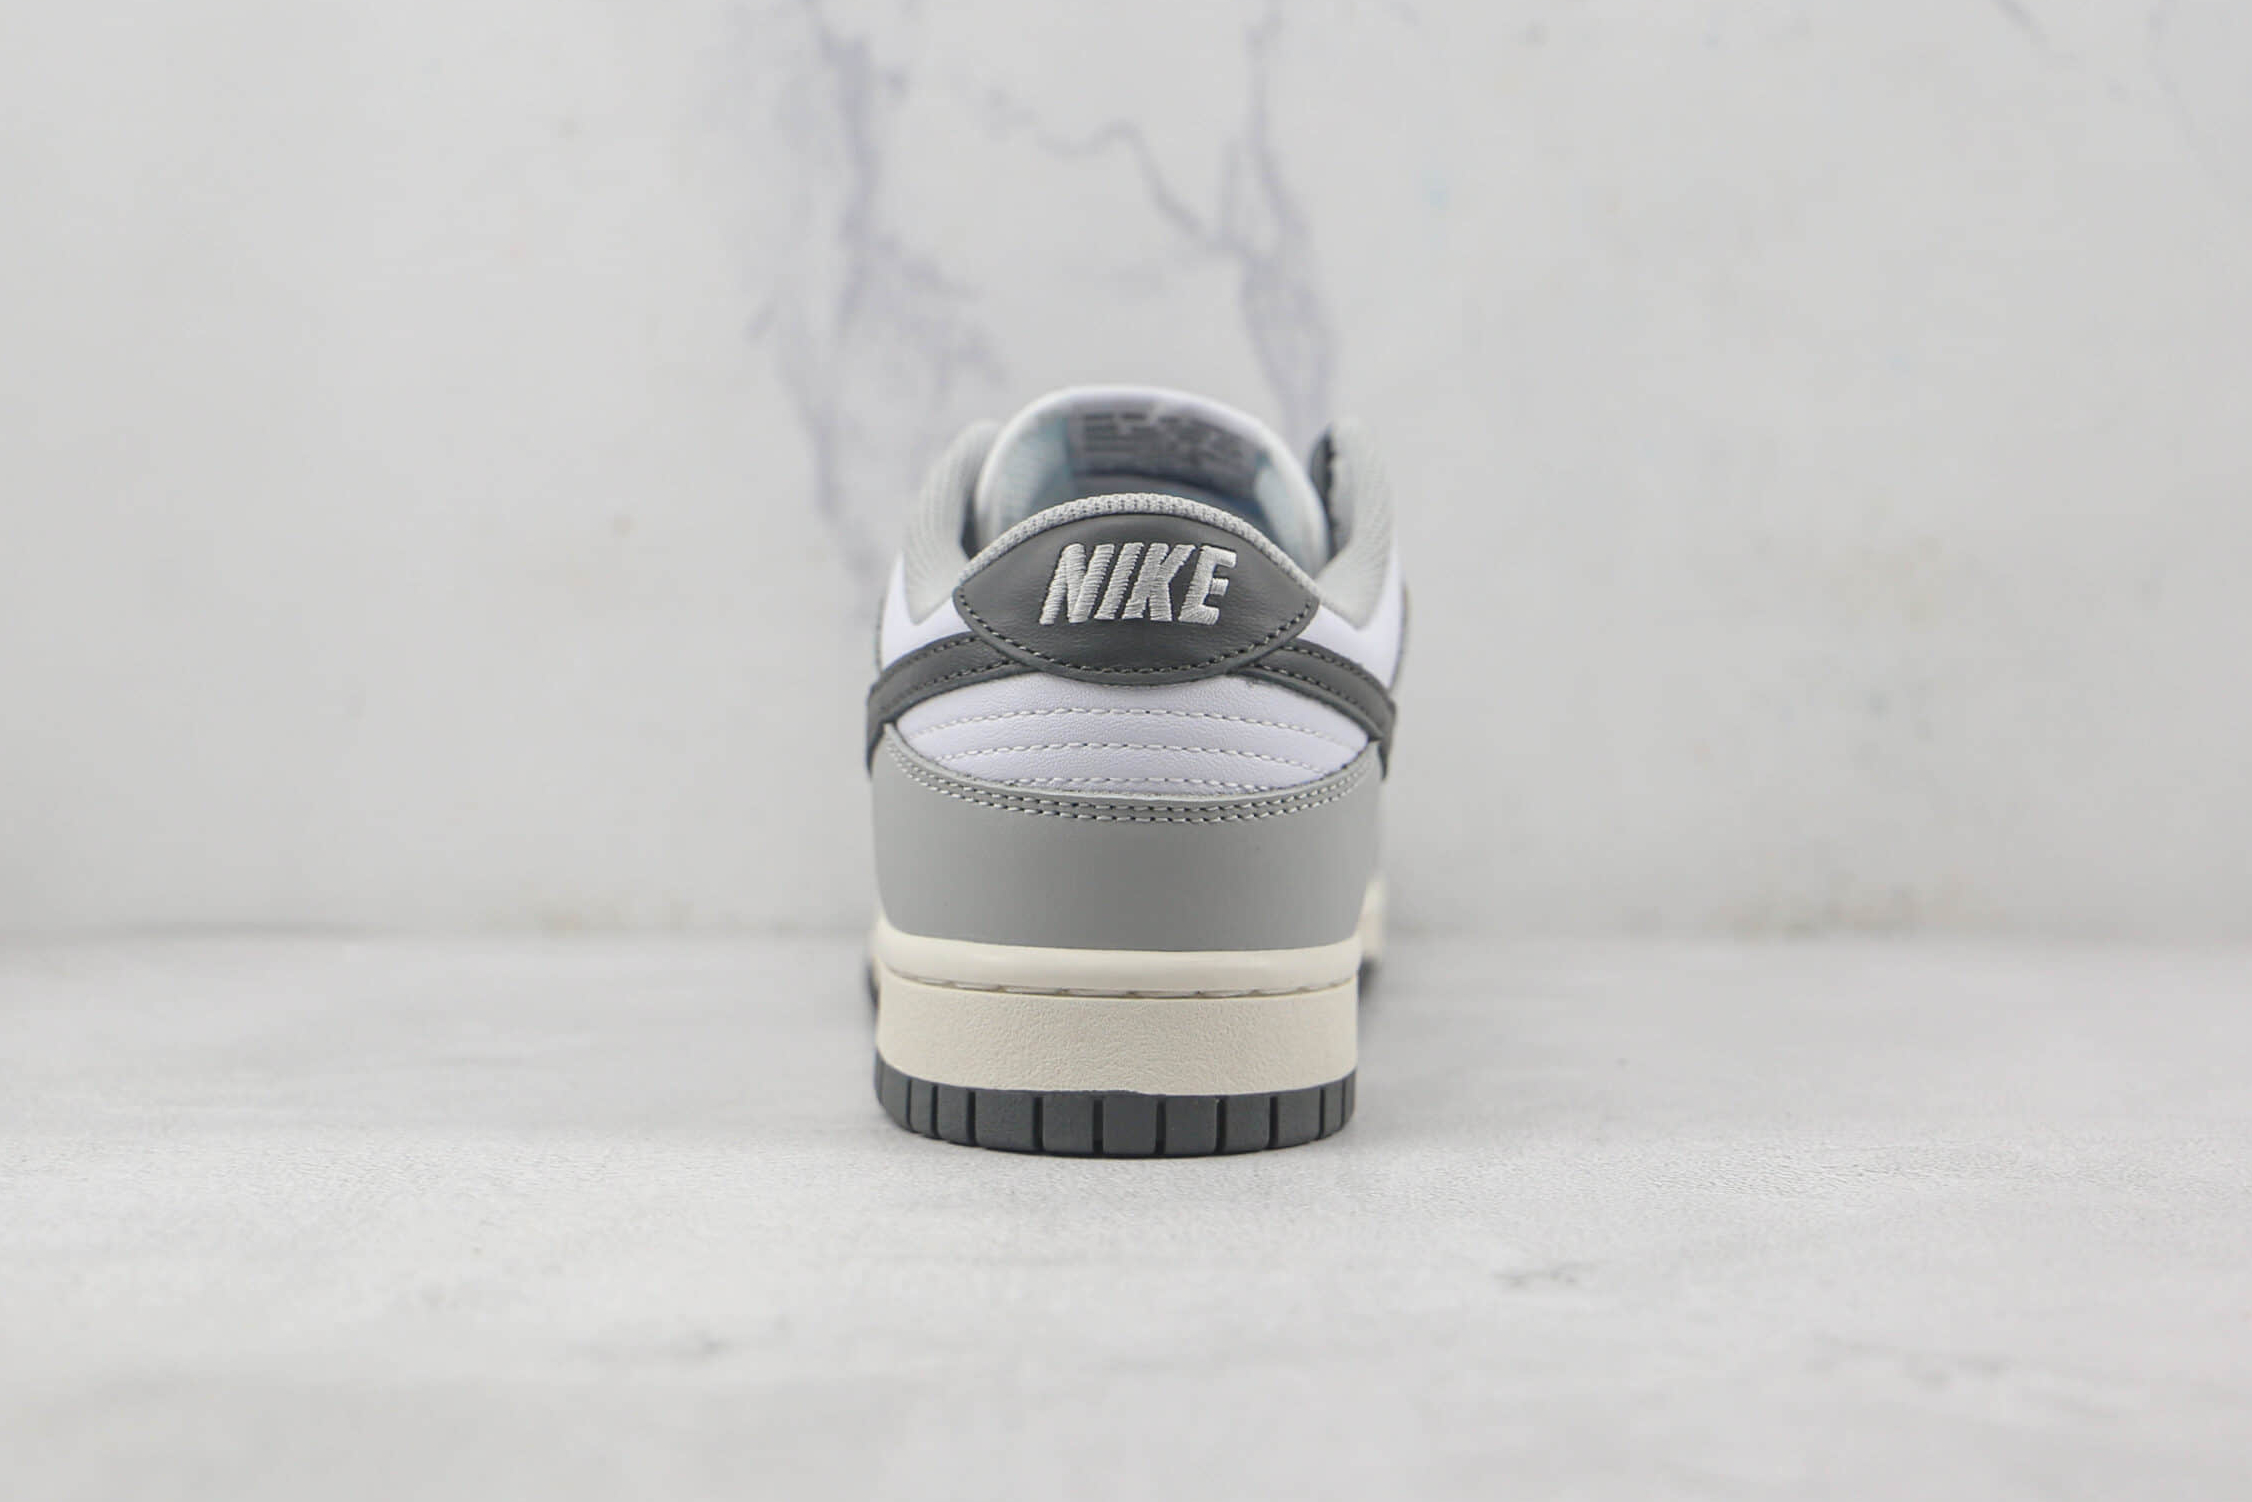 Nike Dunk Low 'Light Smoke Grey' DD1503-117 - Stylish and Versatile Sneakers for Men